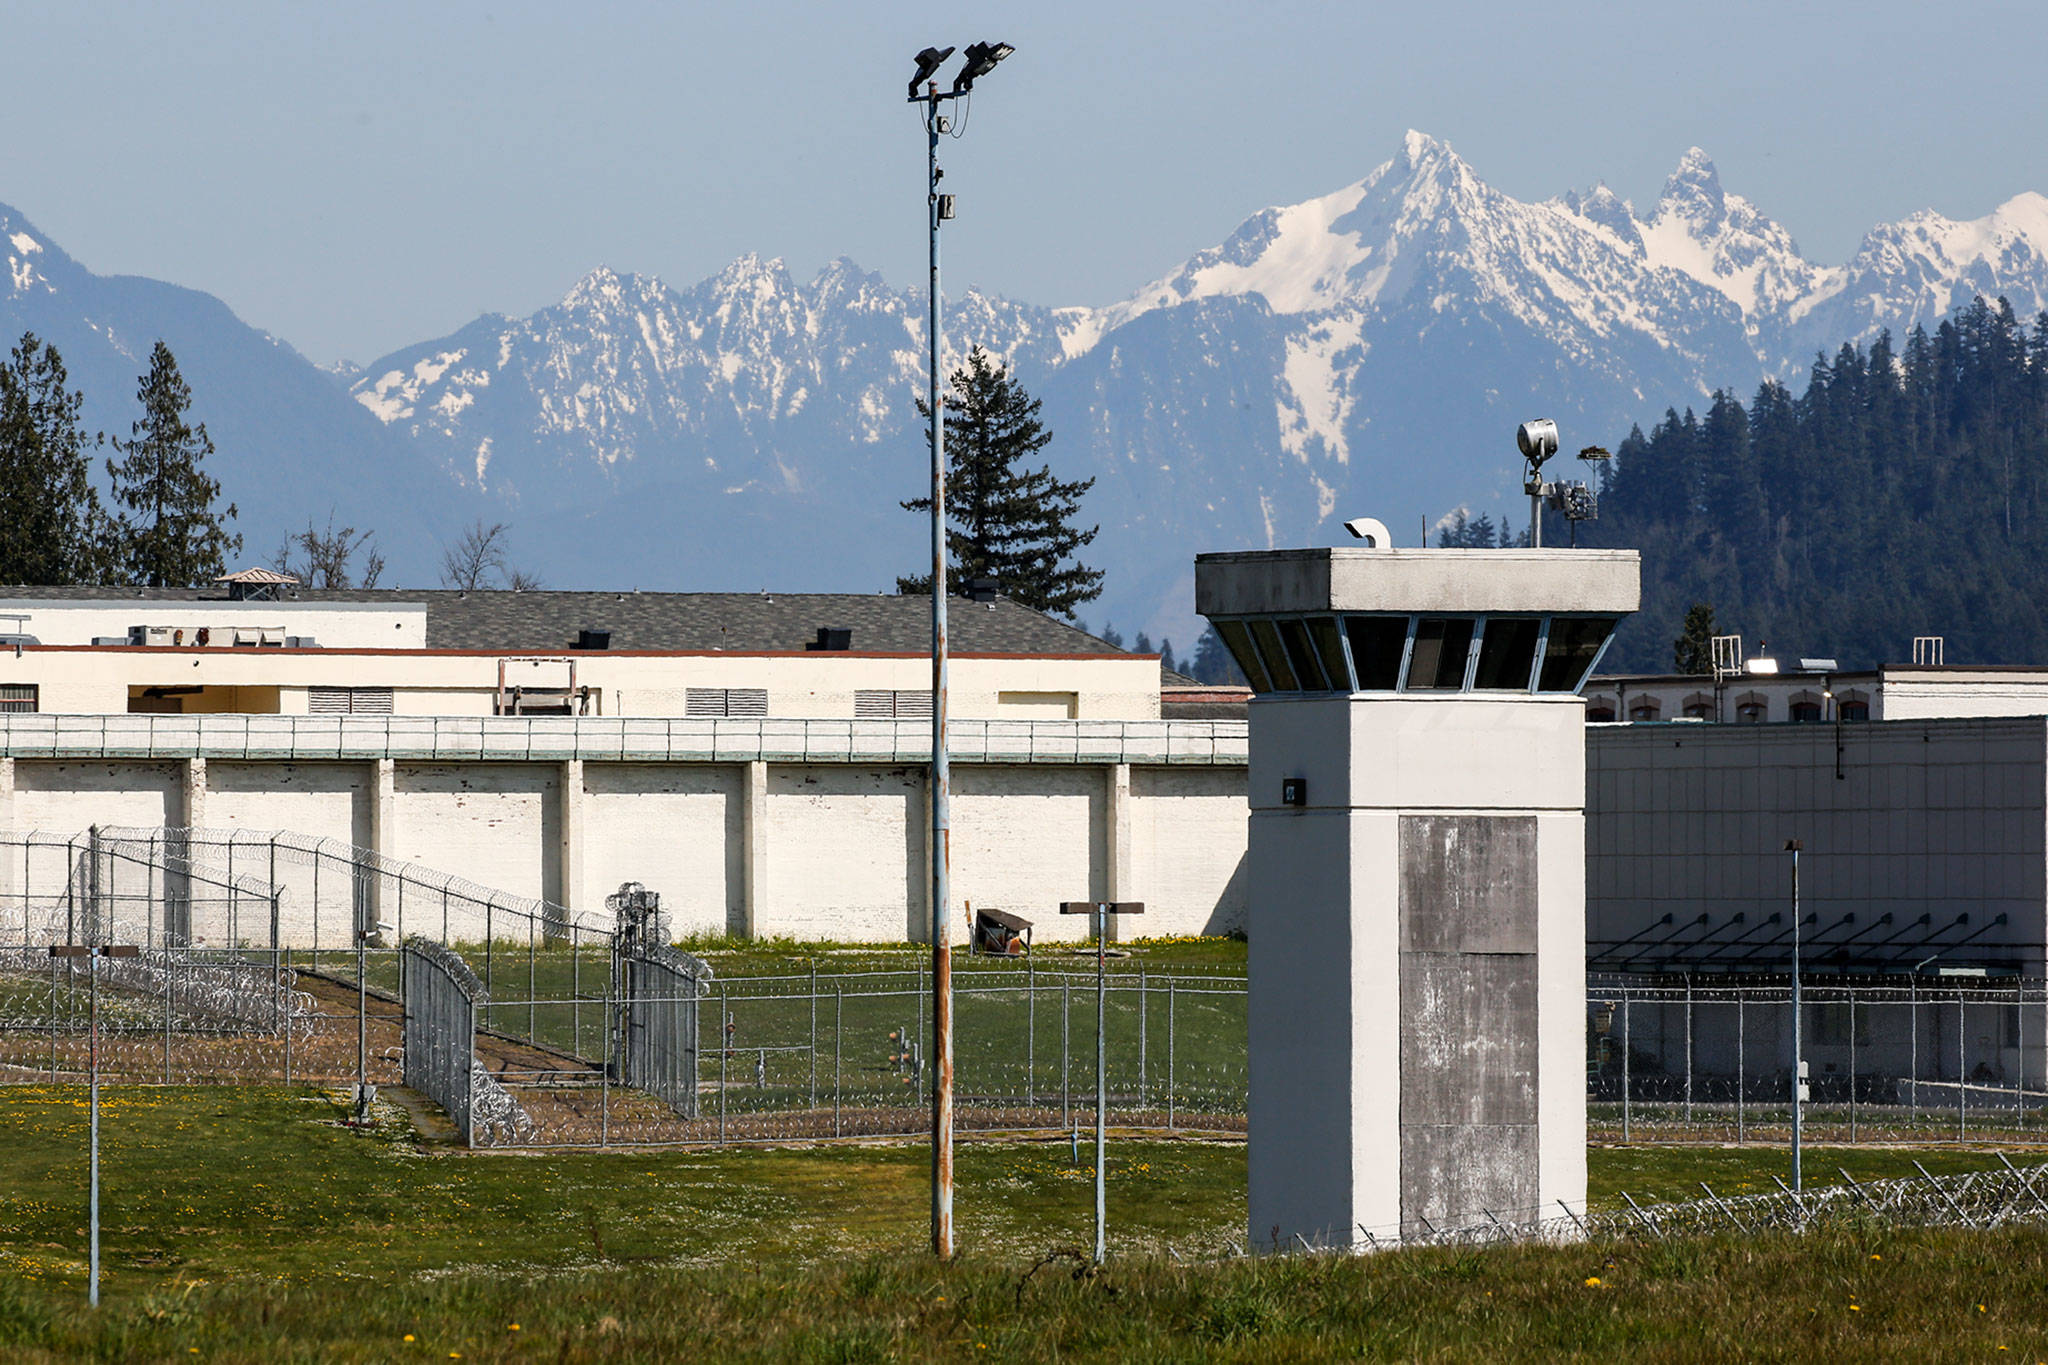 The Monroe Correctional Complex. (Kevin Clark/The Everett Herald)